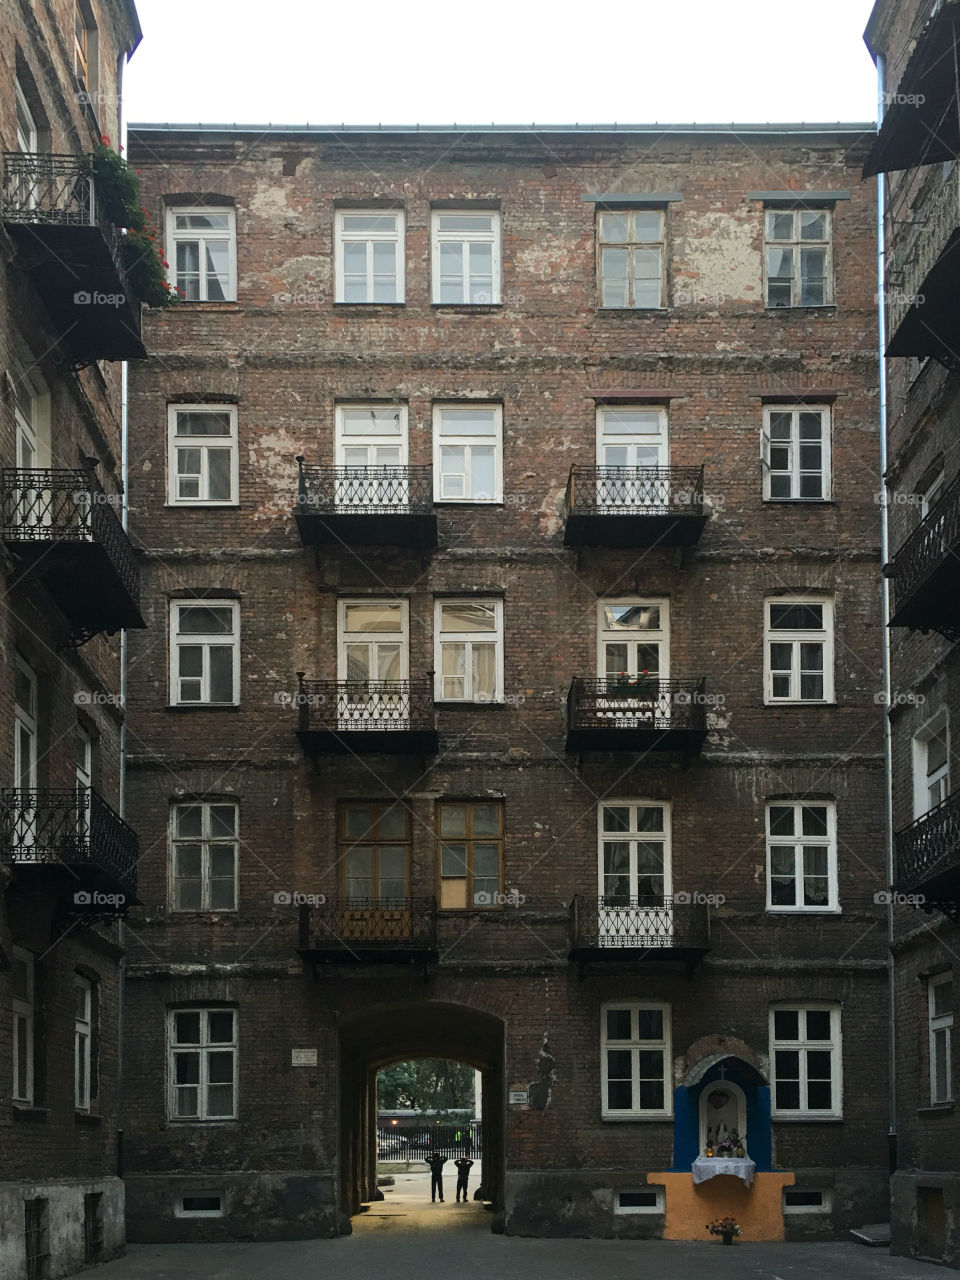 Two children playing in the backyard of old tenement house made of brick with a wallshrine on facade.